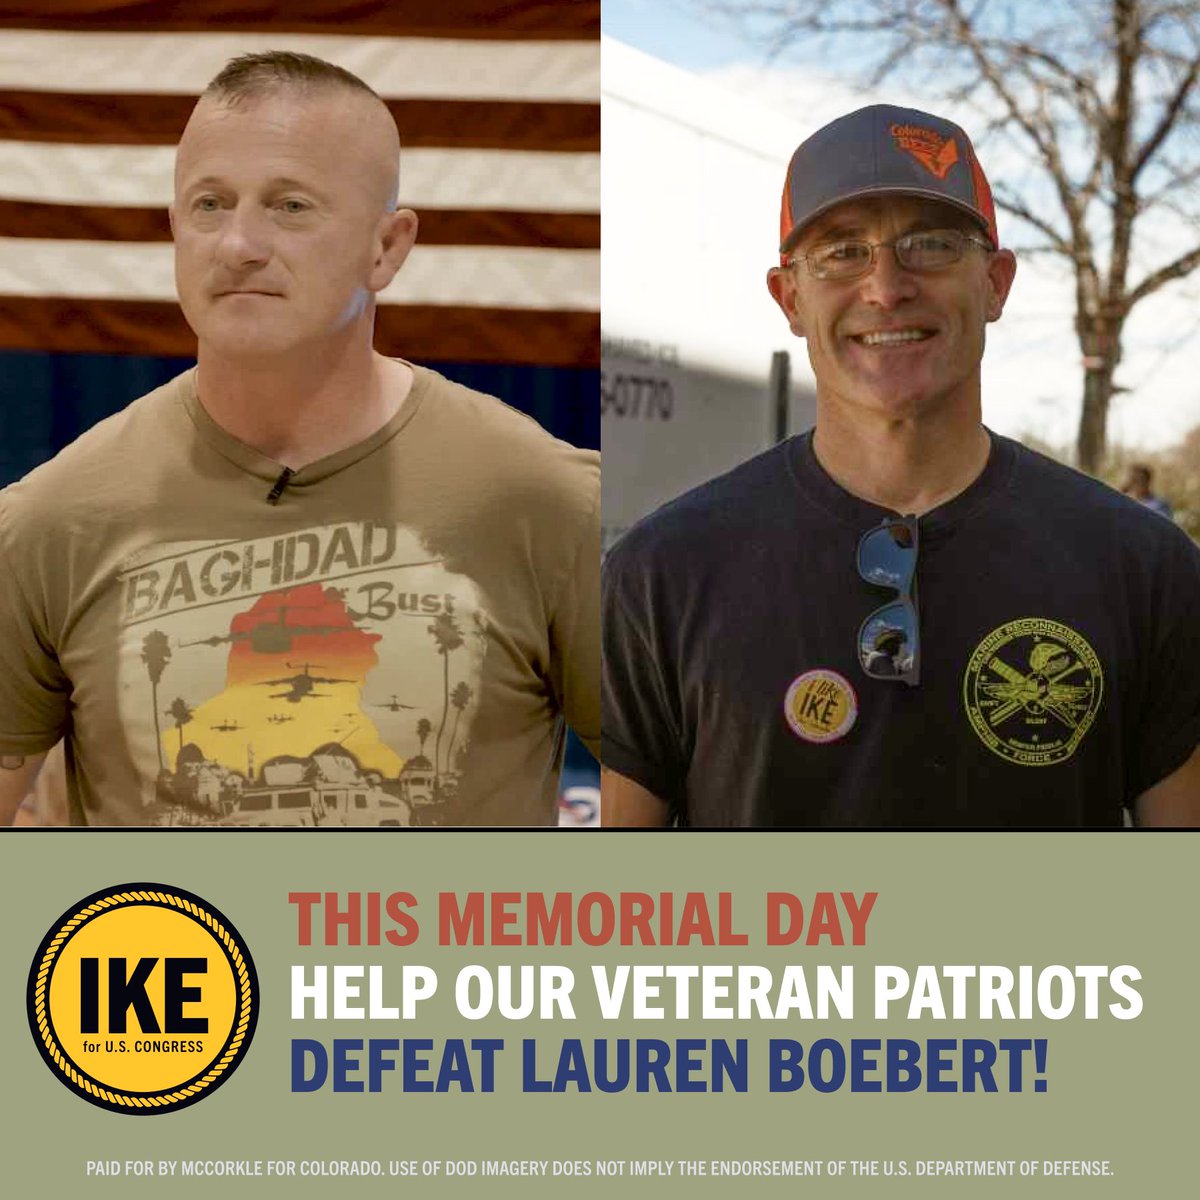 THIS MEMORIAL DAY, WILL YOU DIG DEEP TO HELP OUR VETERANS DEFEND OUR DEMOCRACY?

Help us fight > ike.run/vets

USMC veteran and patriot Ike McCorkle is beating the traitor @laurenboebert in the polls by 7 points, but we know that anything less than total victory risks